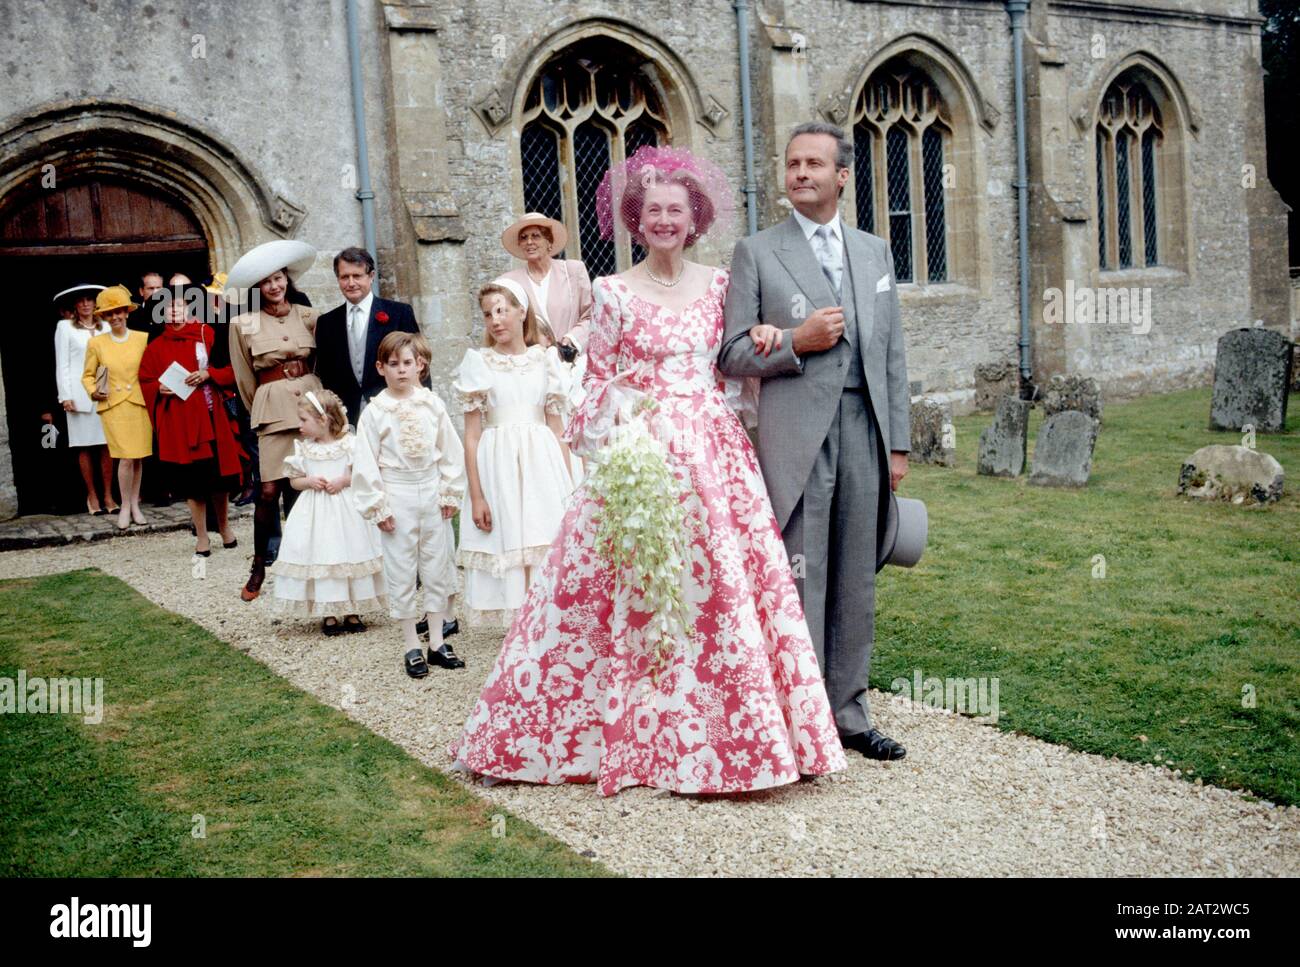 Raine, The Countess Spencer - Raine de Chambrun and Count Jean-Francois  Pineton de Chambrun on the day of their wedding, Britain Stock Photo - Alamy